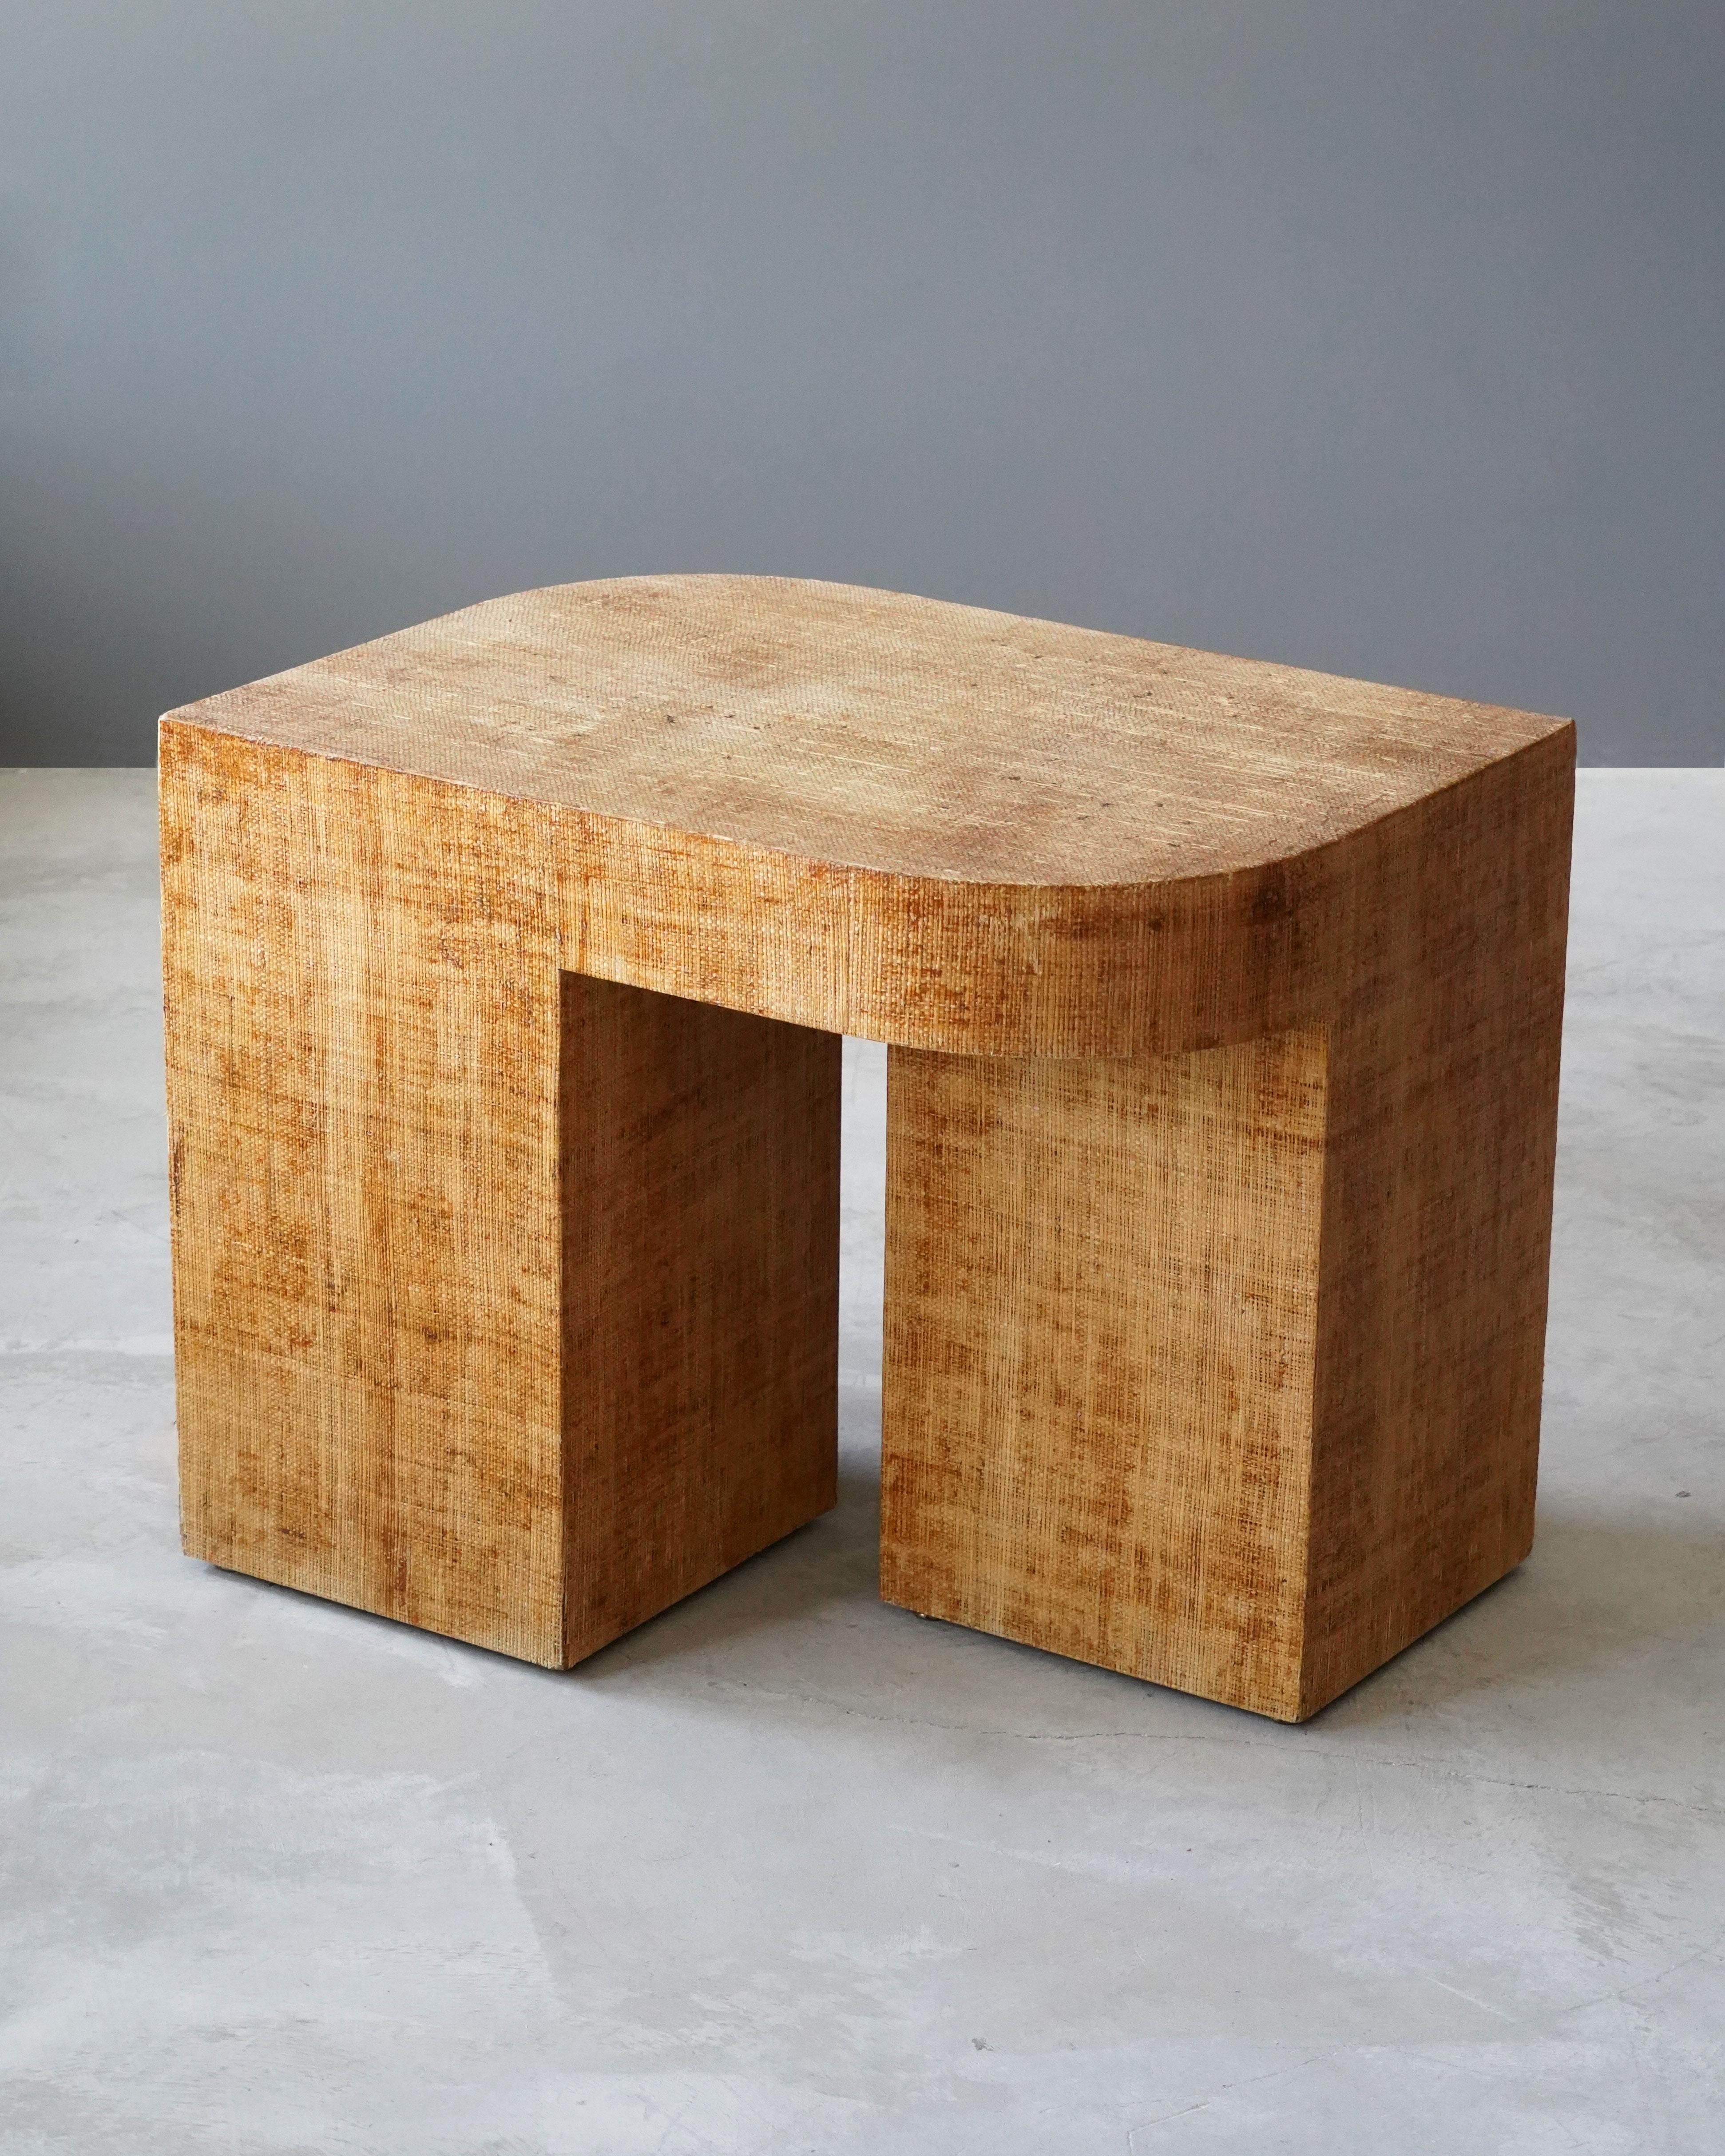 A minimalist side table or end table. Designed and produced in the United States, 1970s. Features grasscloth / raffia over wood.

Other designers of the period include Karl Springer, Vladimir Kagan, Vladimir Kagan, Paul Frankl, and Donald Judd.